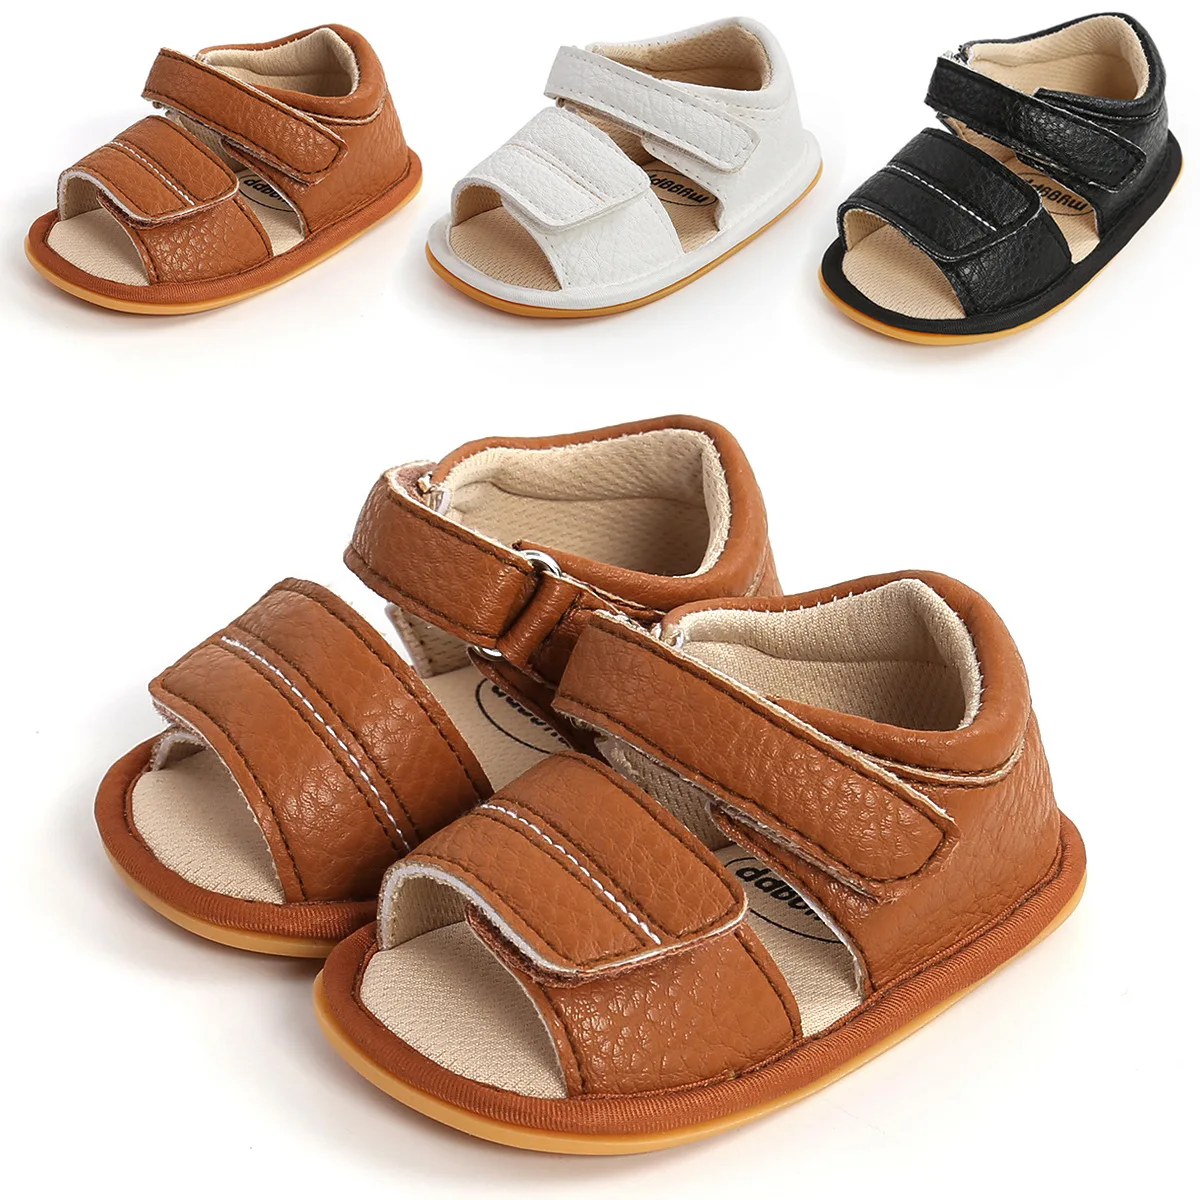 

Newborn Baby Boy Sandals Summer Shoes Baby Sandals Rubber Soles Crib Shoes Toddler Shoes First Walkers 0-18M